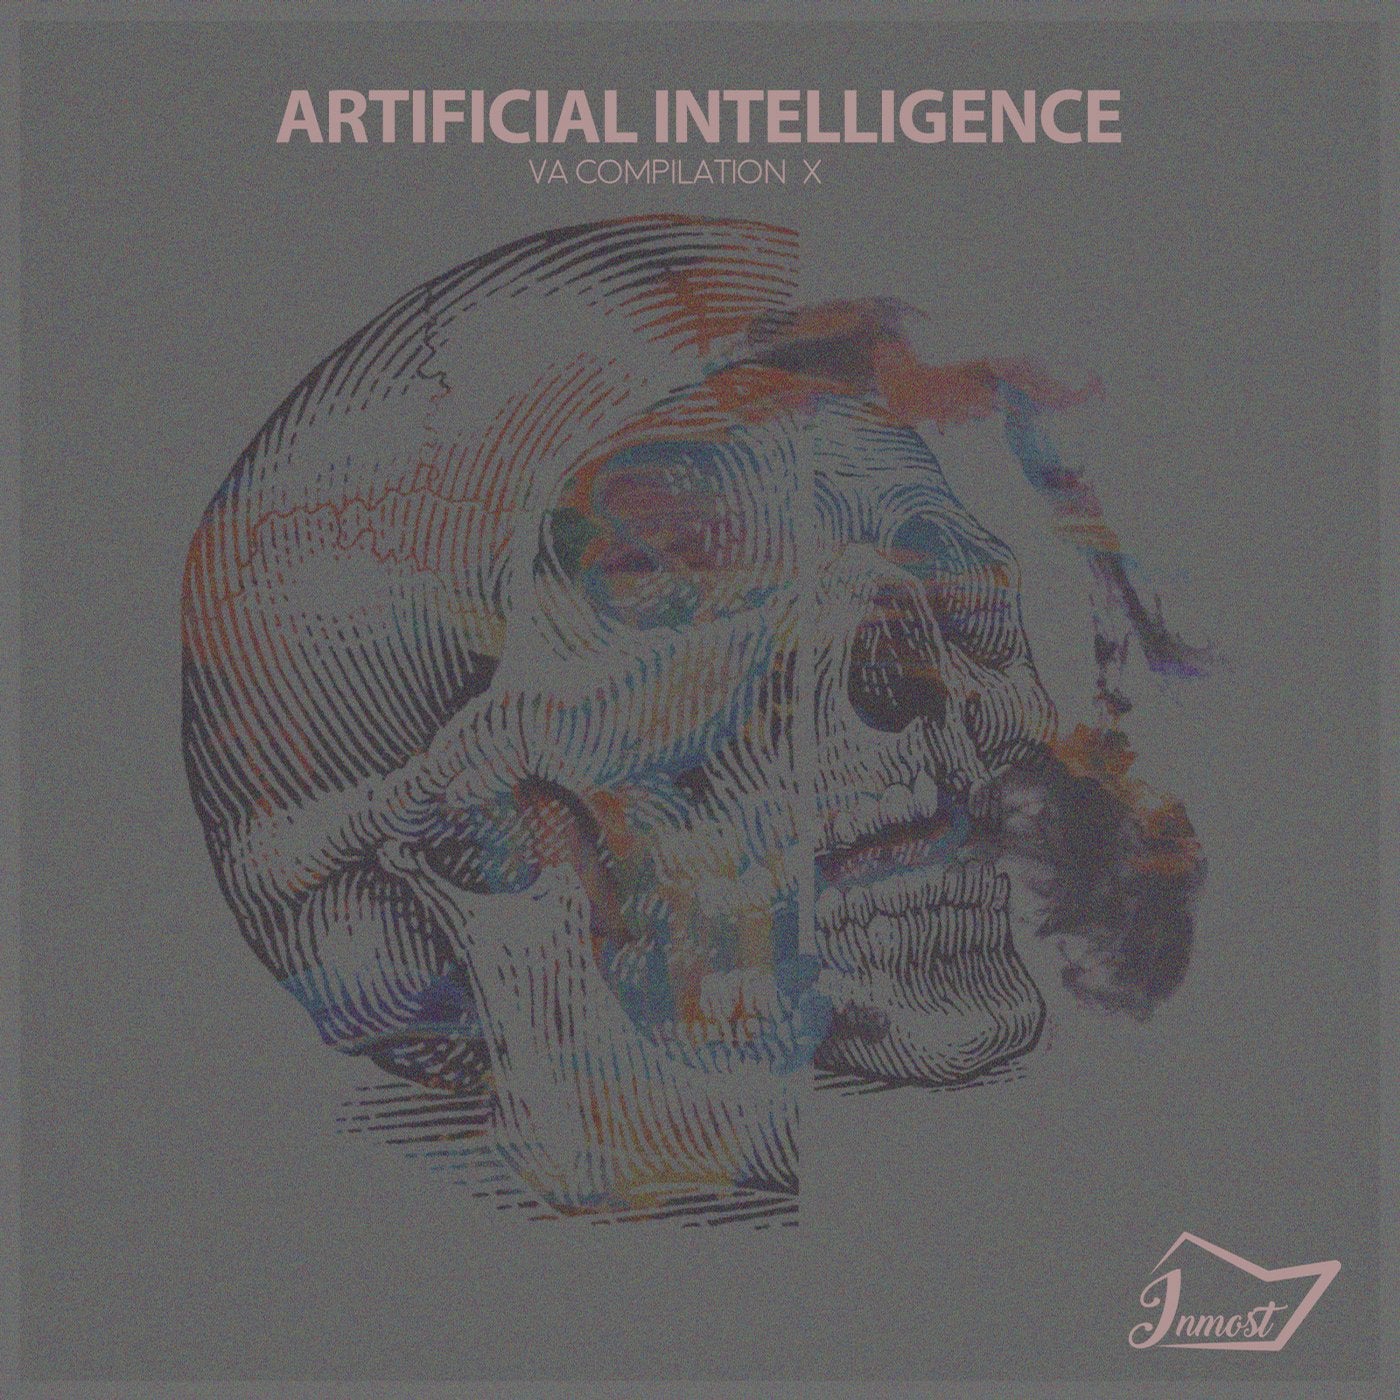 Artificial Intelligence 10